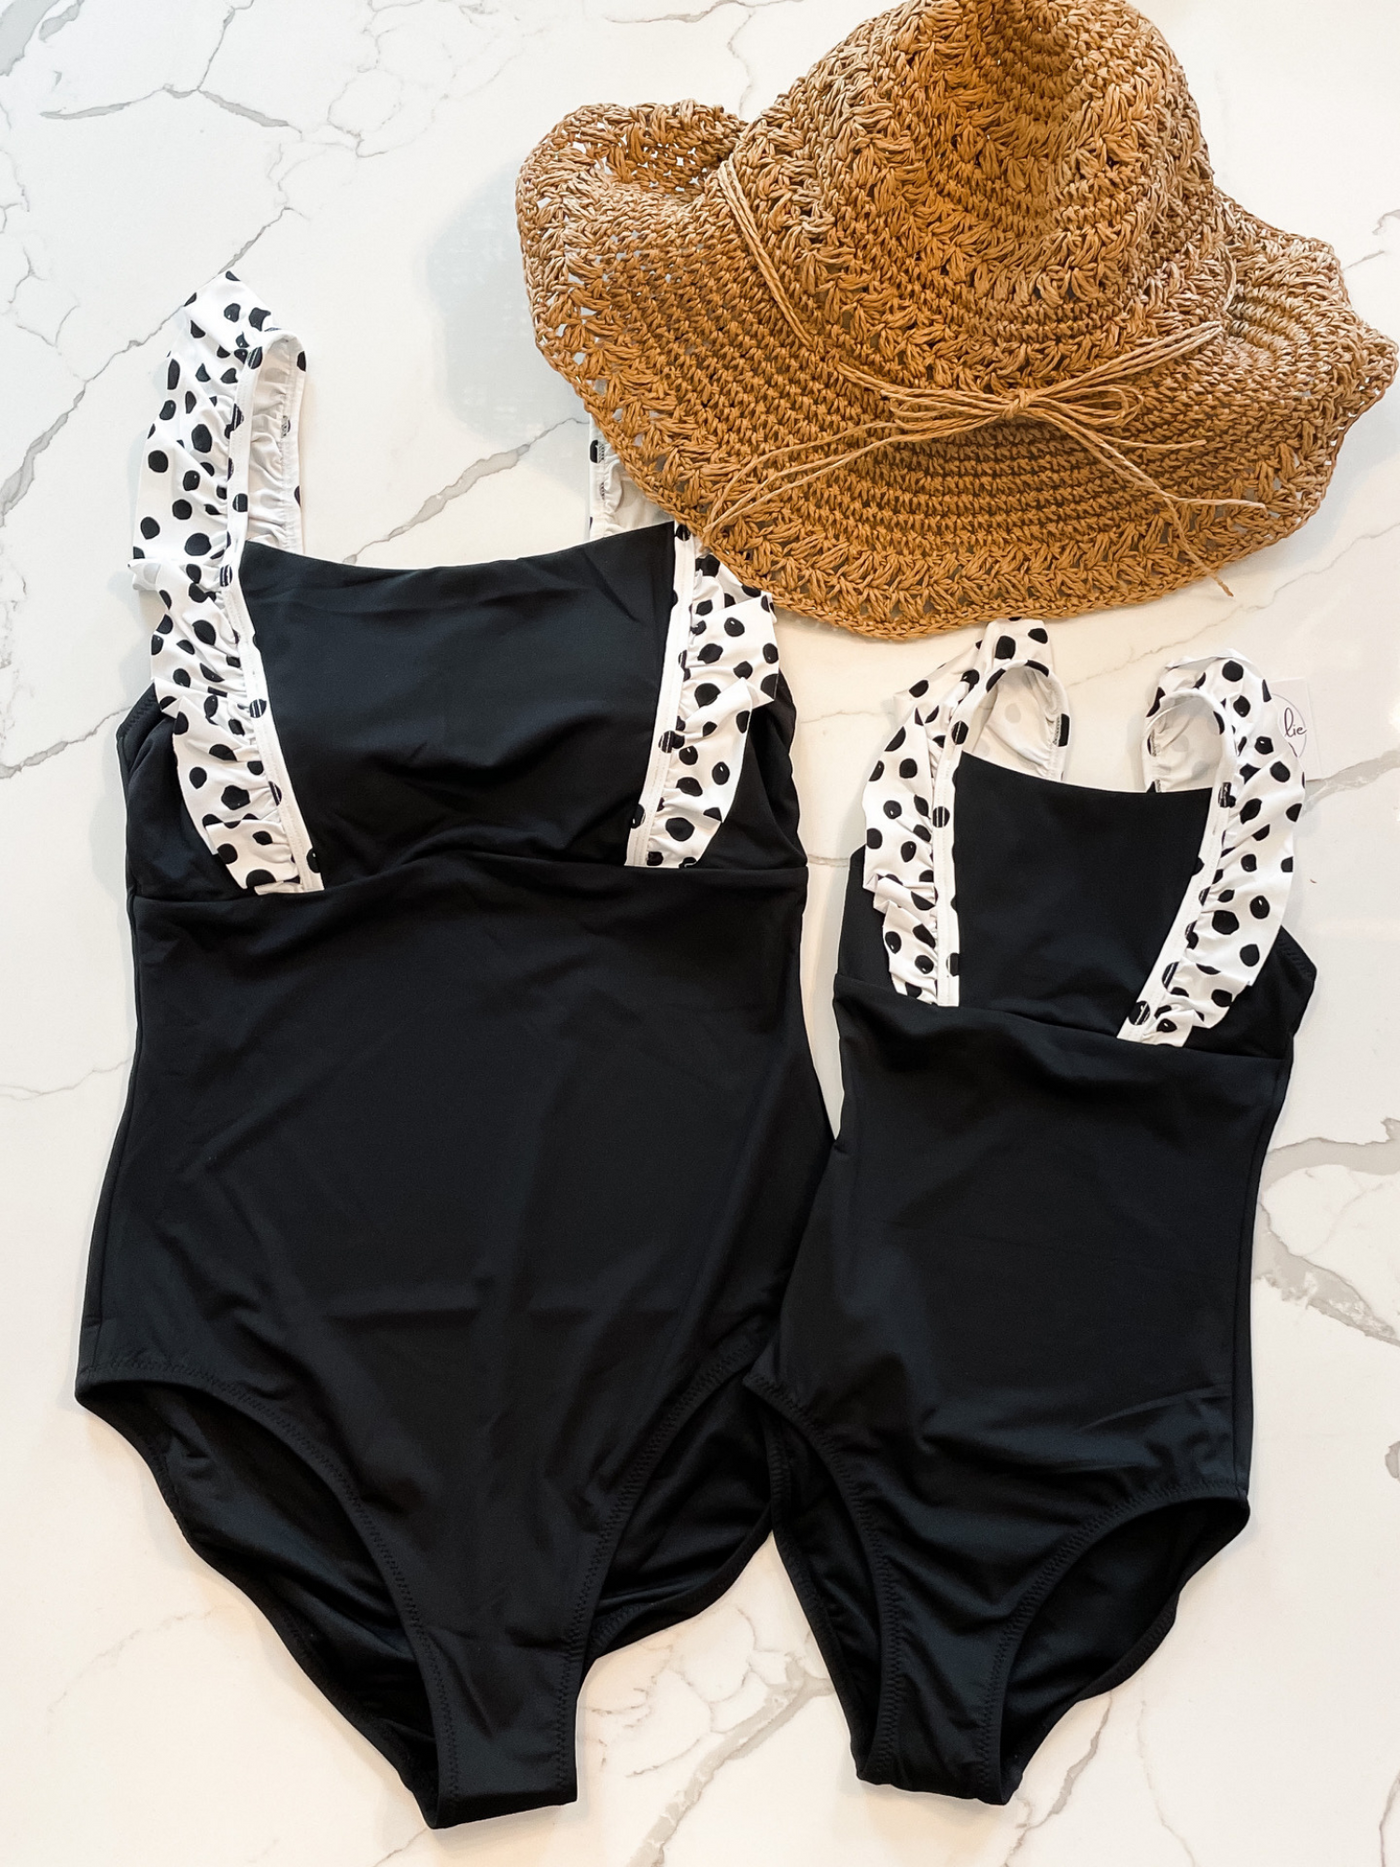 Navalora Matching Swimsuits Mommy and Me Girl's Dalmatians on Vacation Ruffle Black and White One Piece Family Matching Swimsuit